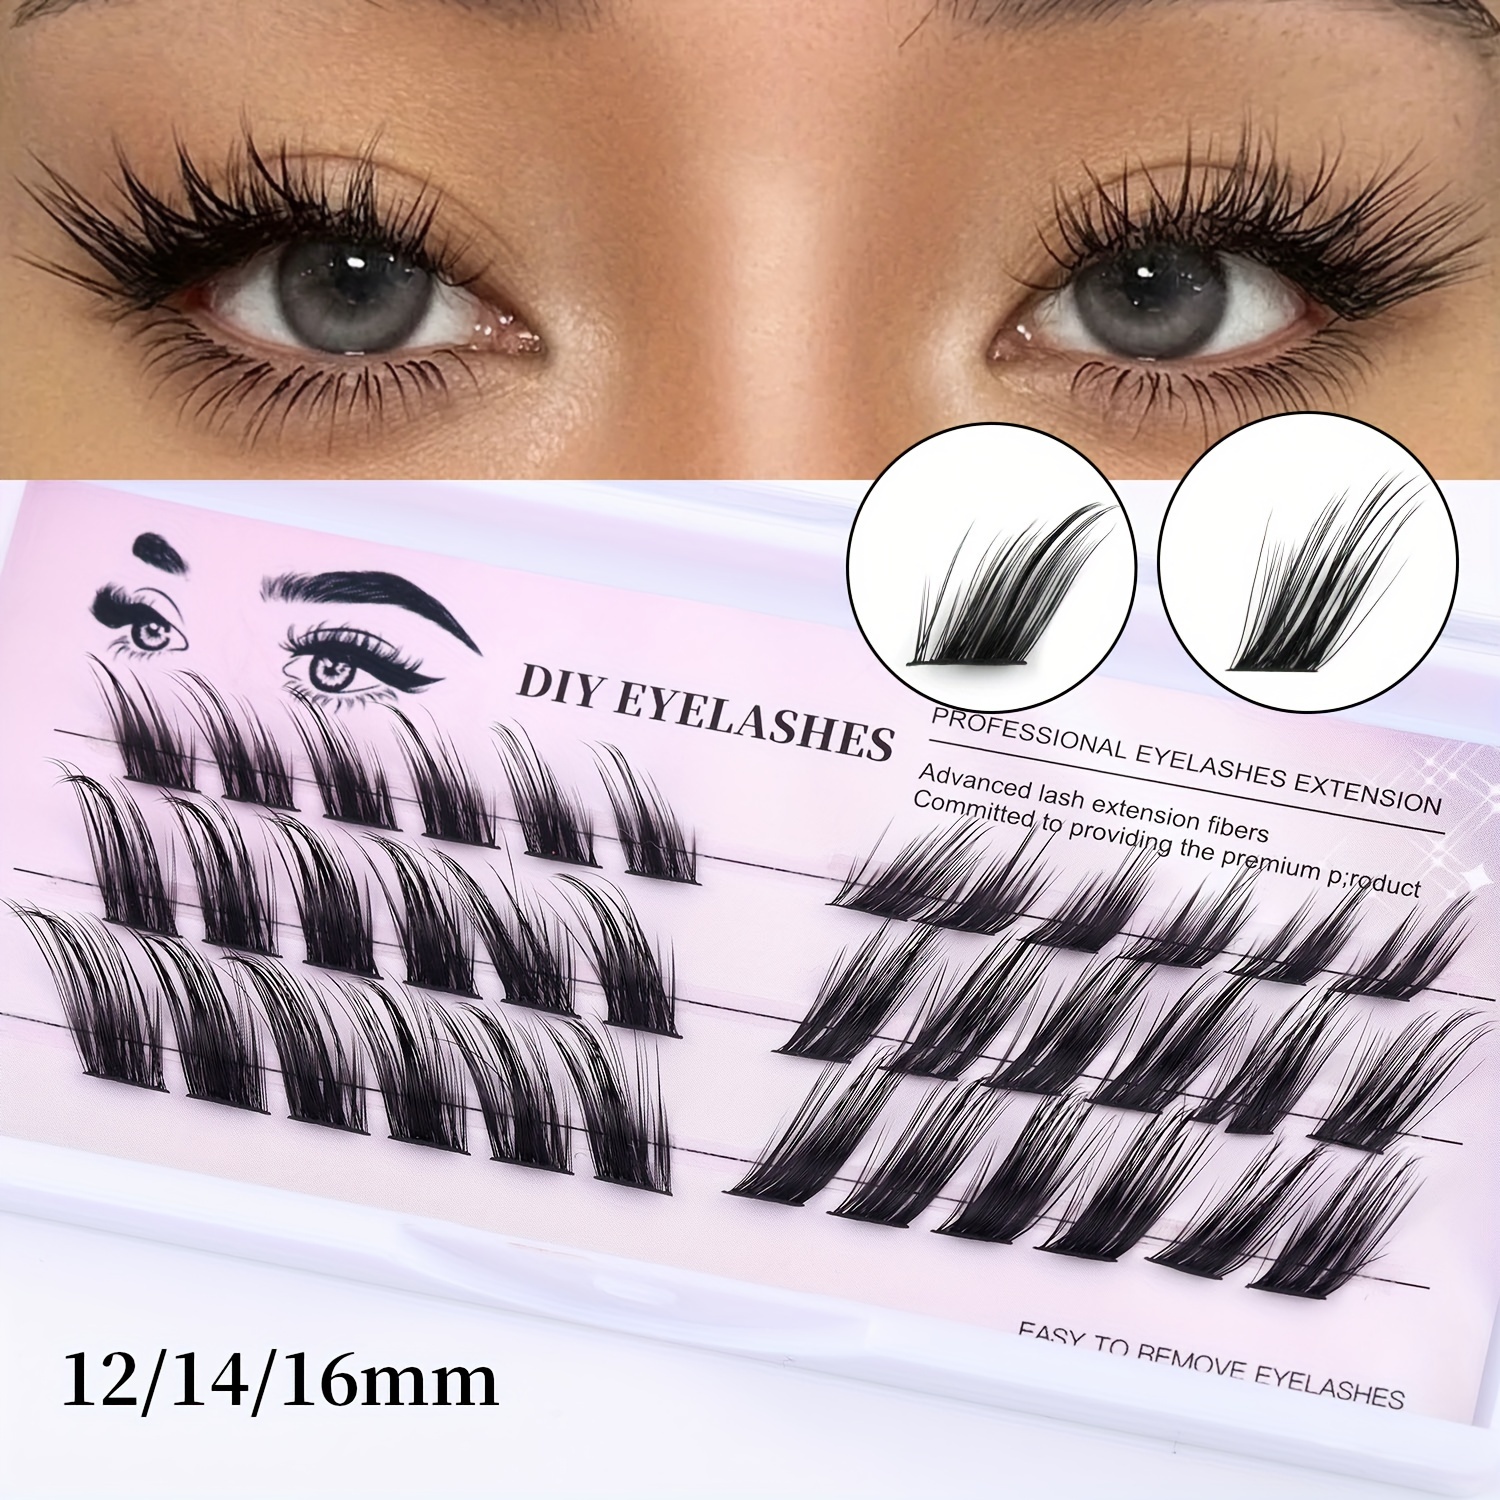 

Diy Eyelash Clusters Box, 12-16mm Natural Fluffy Individual Lash Extensions, Easy To Remove, Professional Look, Voluminous Separated Lashes For Personal Use